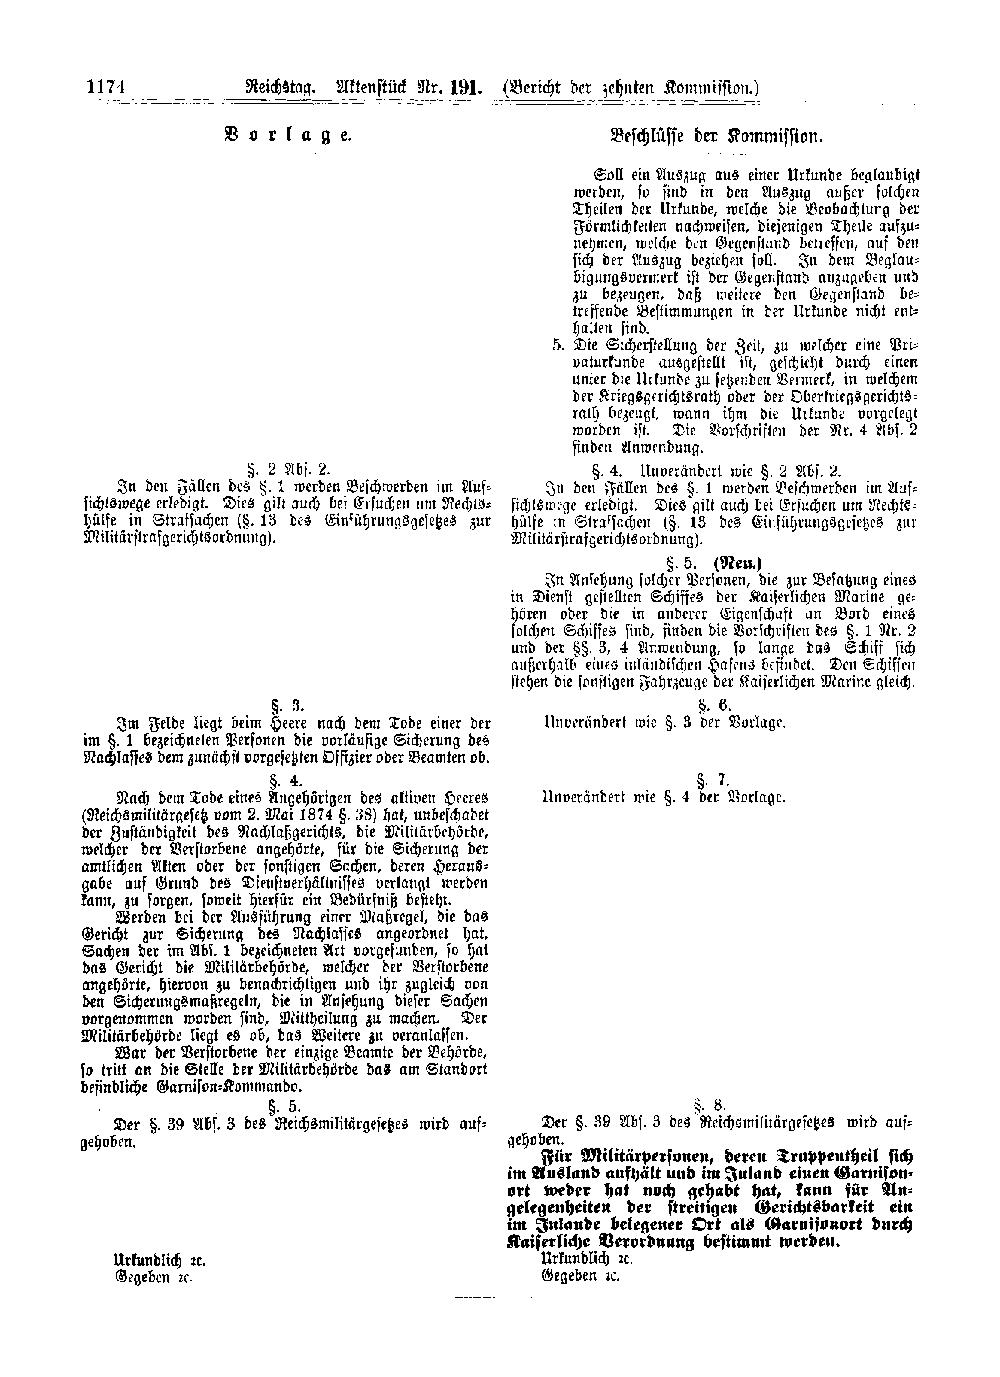 Scan of page 1174